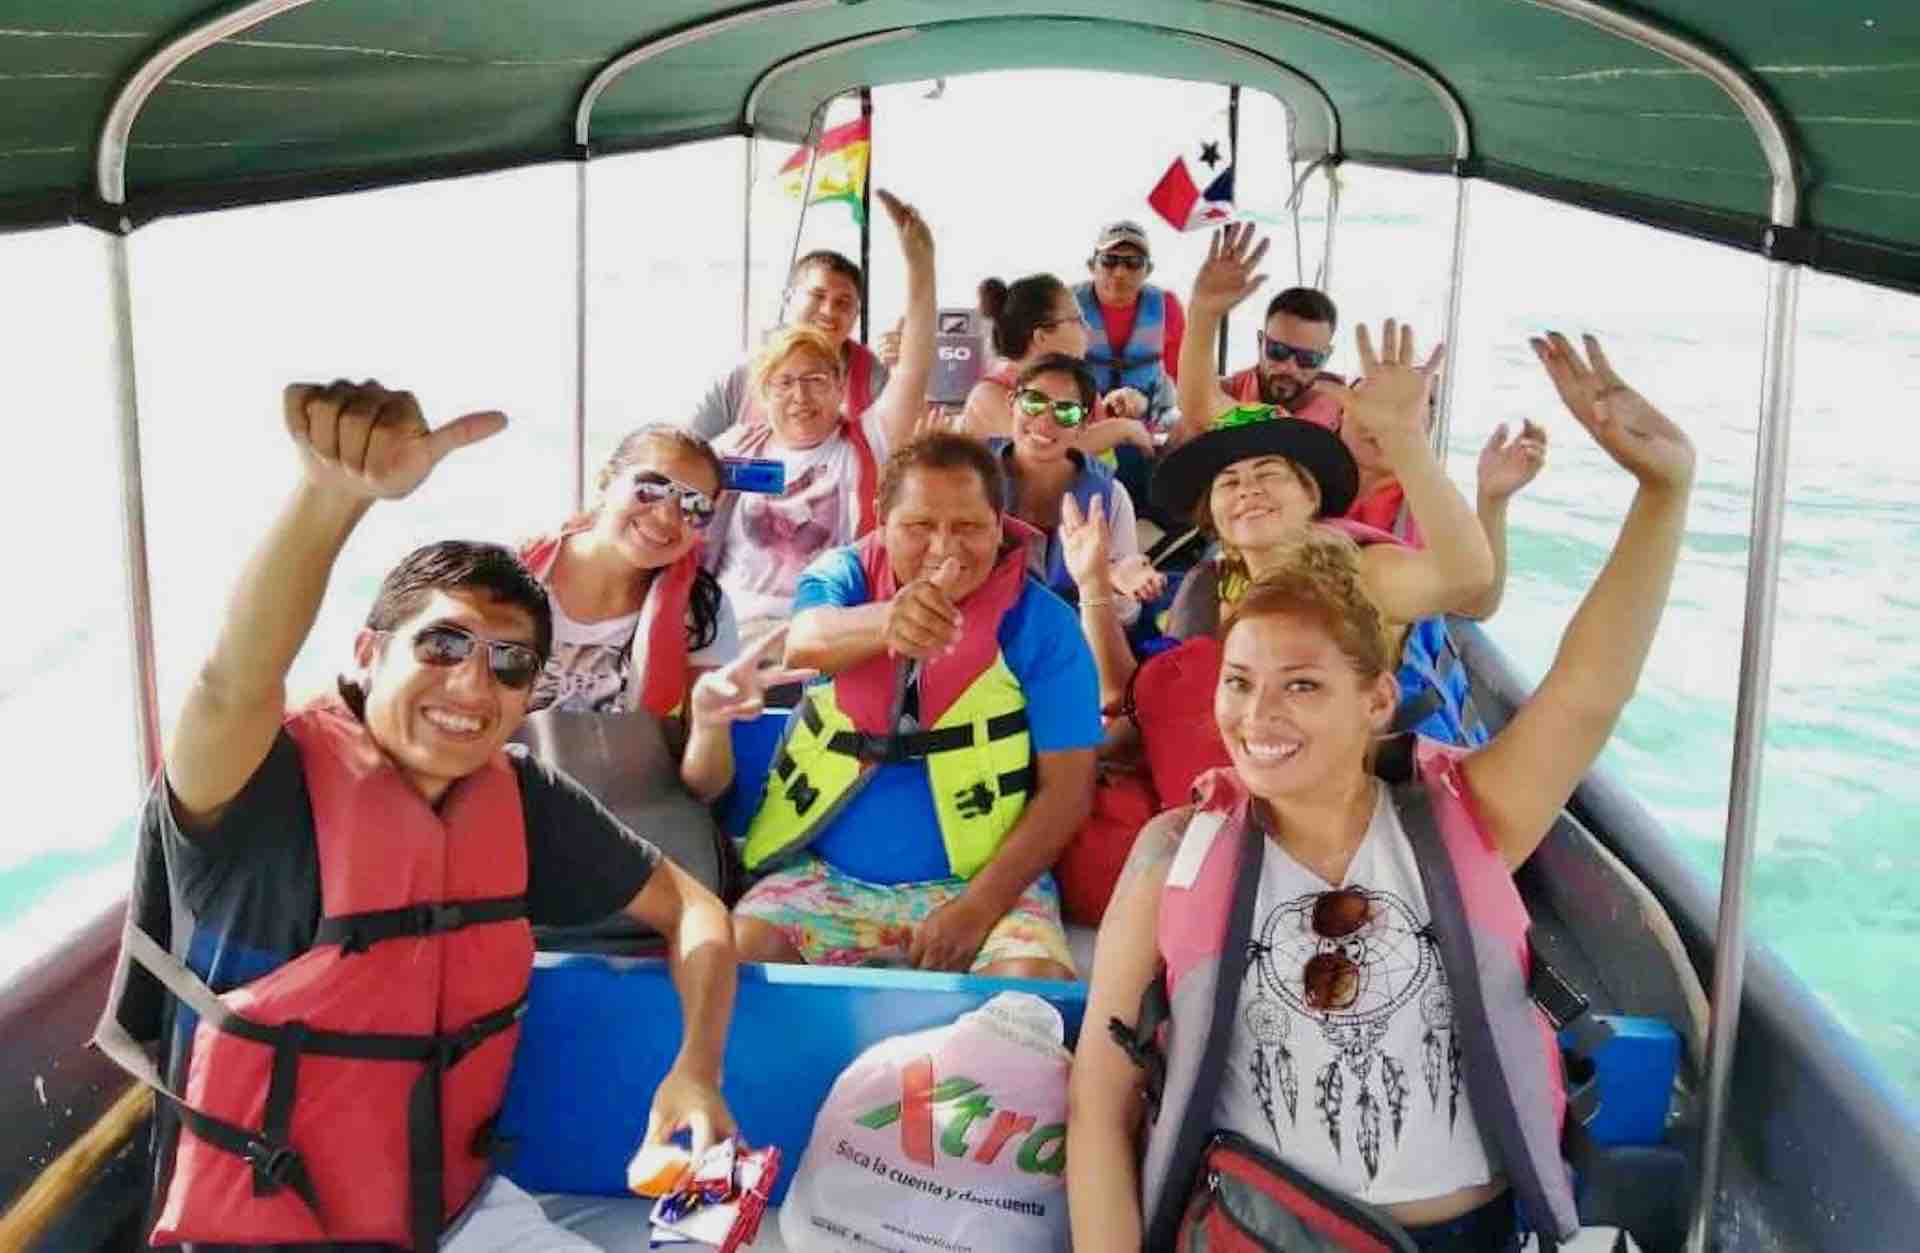 San Blas islands day tour guests in lancha boat